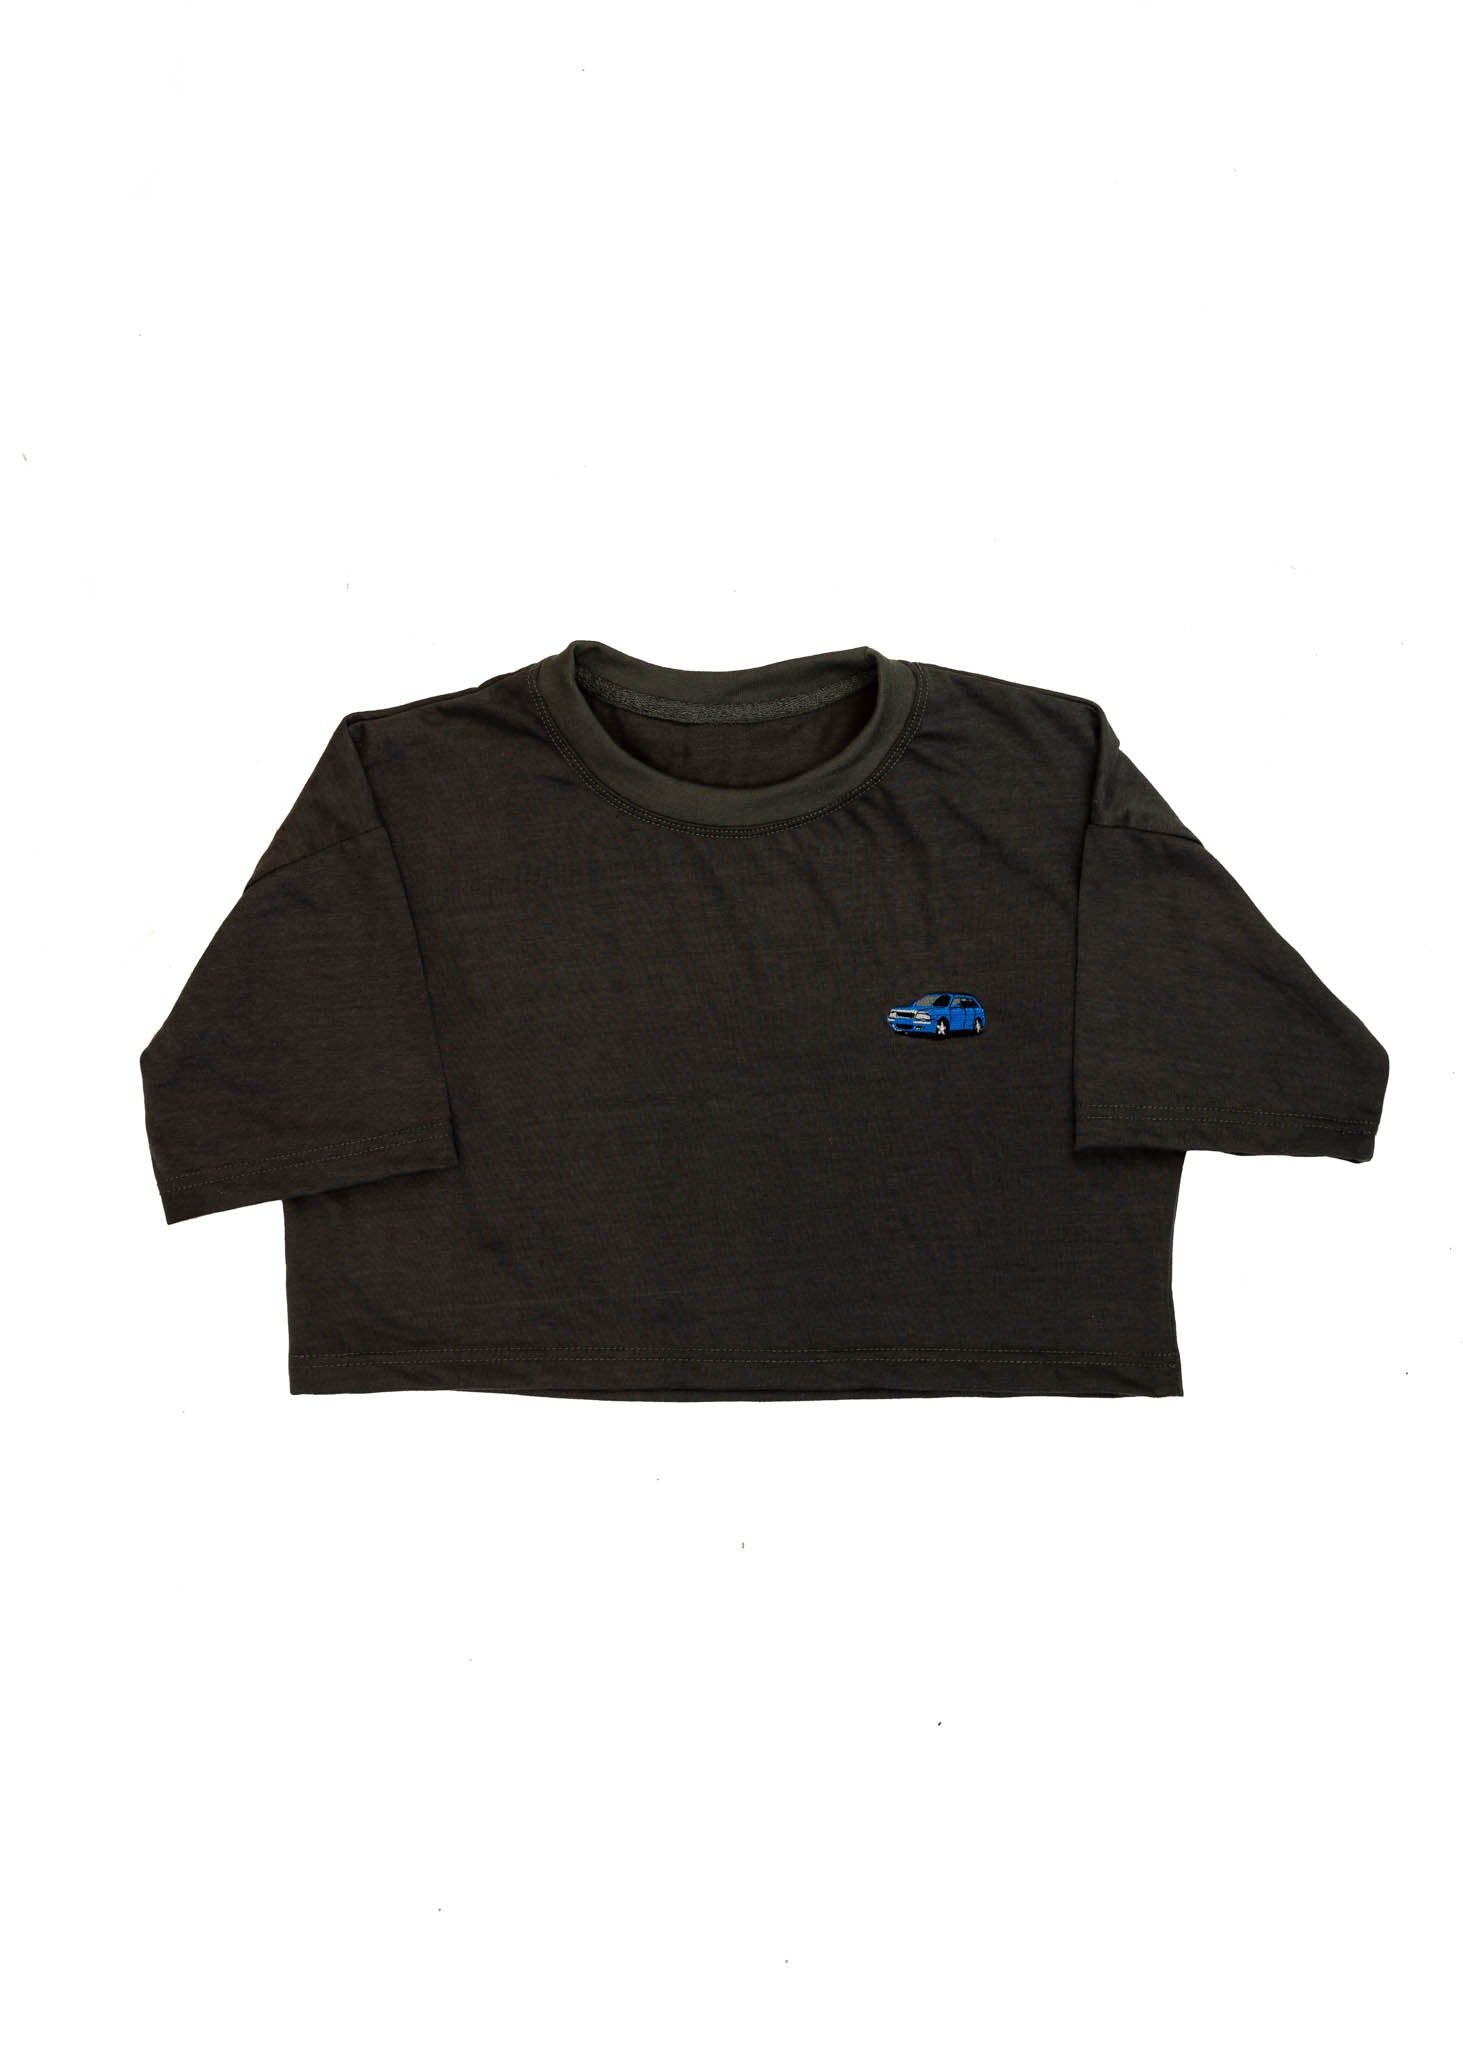 A dark grey cropped t-shirt for Audi women. Front view of a 100% cotton crop tee with an embroidered Nogaro Blue Audi 80 RS2 Avant made by Porsche. The material is stretchy, and non-transparent with a crewneck neckline and short sleeves.